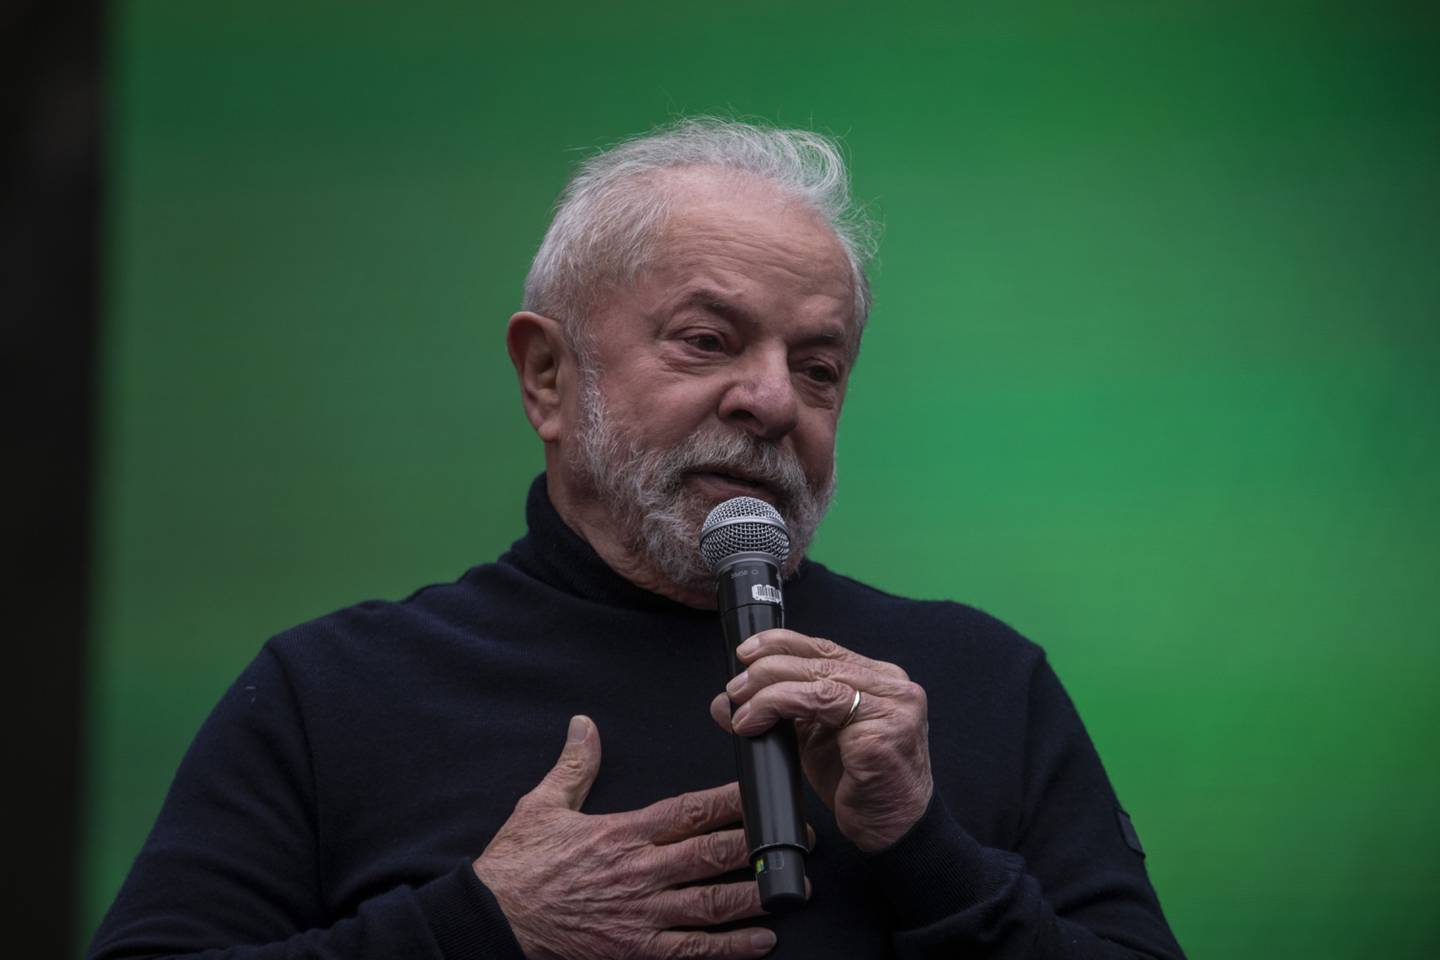 While Lula is set to reestablish normal diplomatic relations with Venezuela if elected in October, his remarks suggest a departure from the near automatic alignment his government maintained with Chavez.